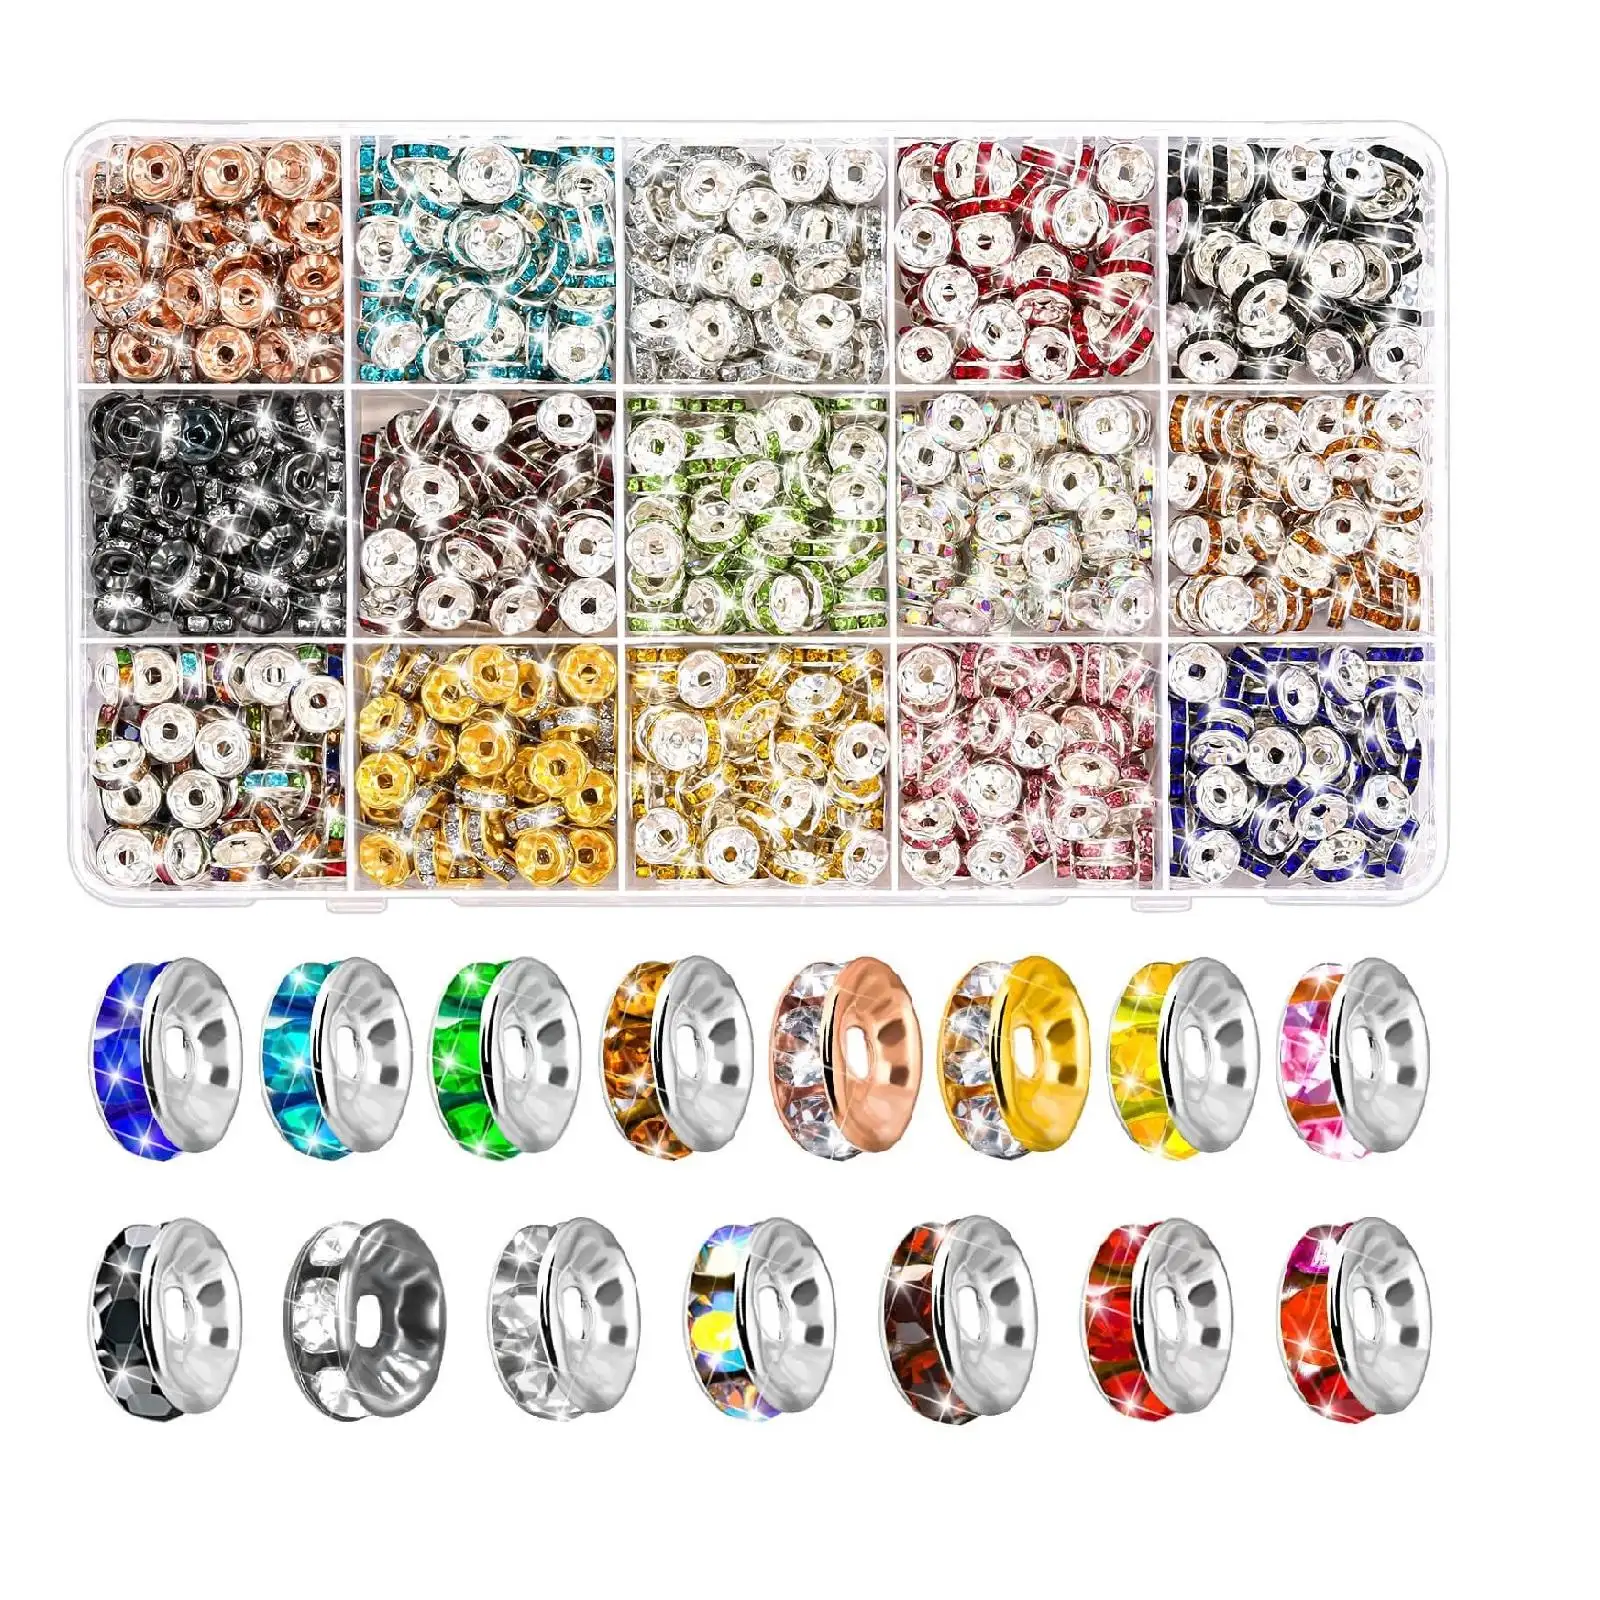 15 Colors 900 Pieces Rondelle Spacer Beads for Jewelry Making 8mm Rhinestone Spacer Beads Crystal Bead Spacers for Bracelets